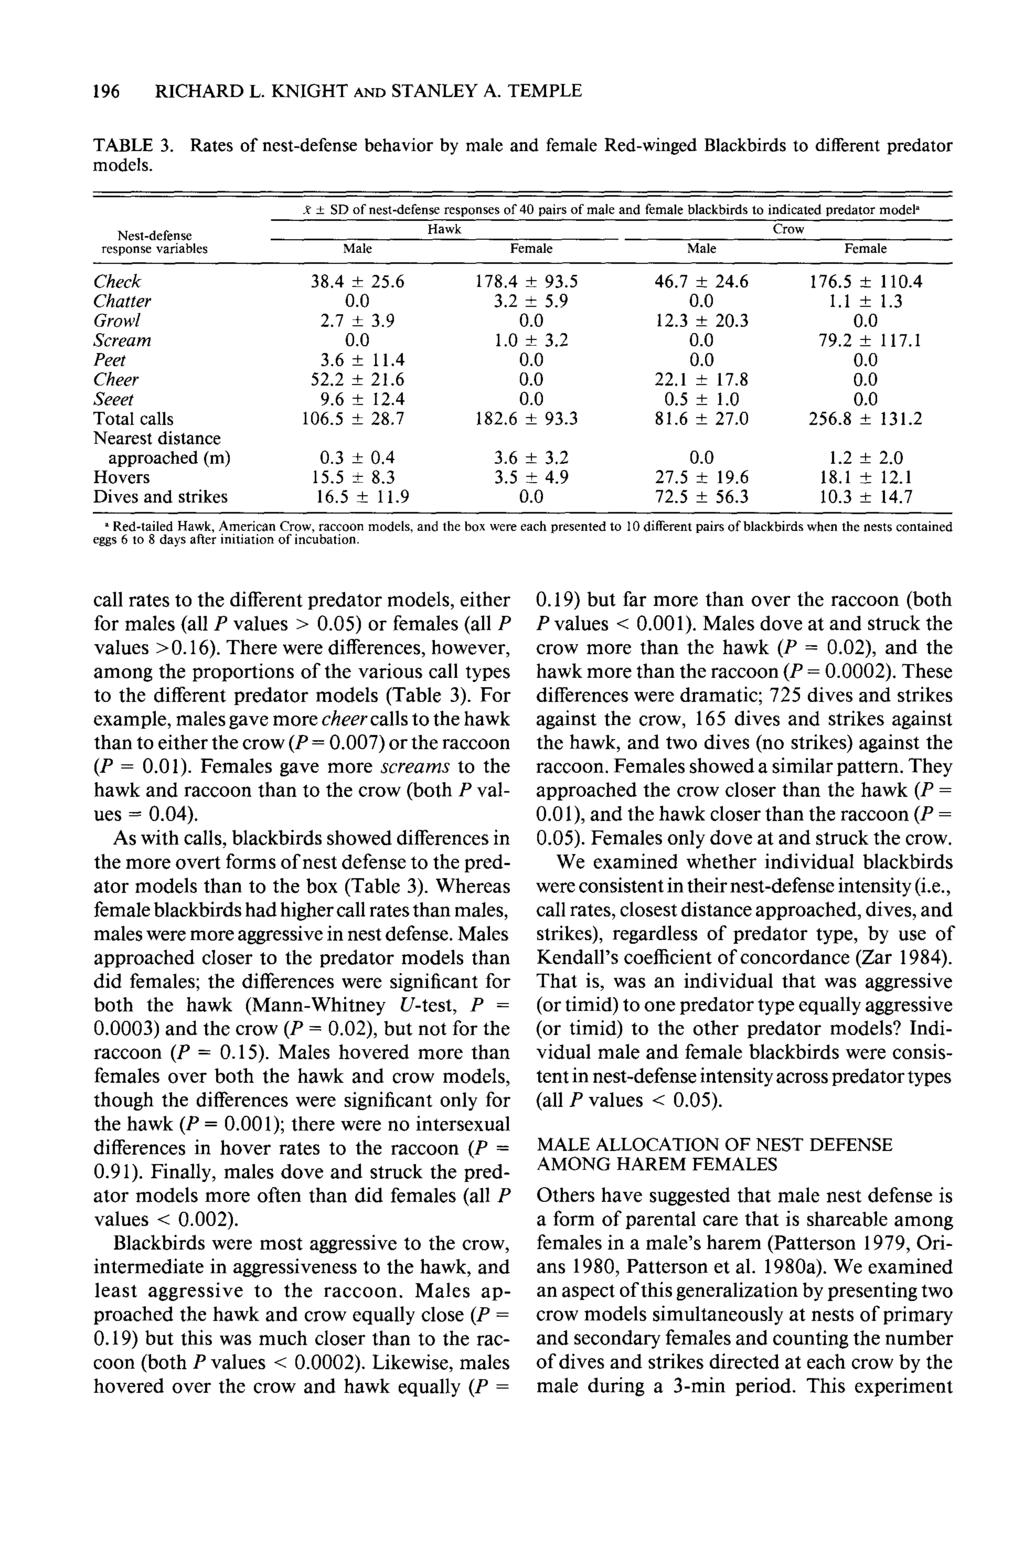 196 RICHARD L. KNIGHT AND STANLEY A. TEMPLE TABLE 3. Rates of nest-defense behavior by male and female Red-winged Blackbirds to different predator models.